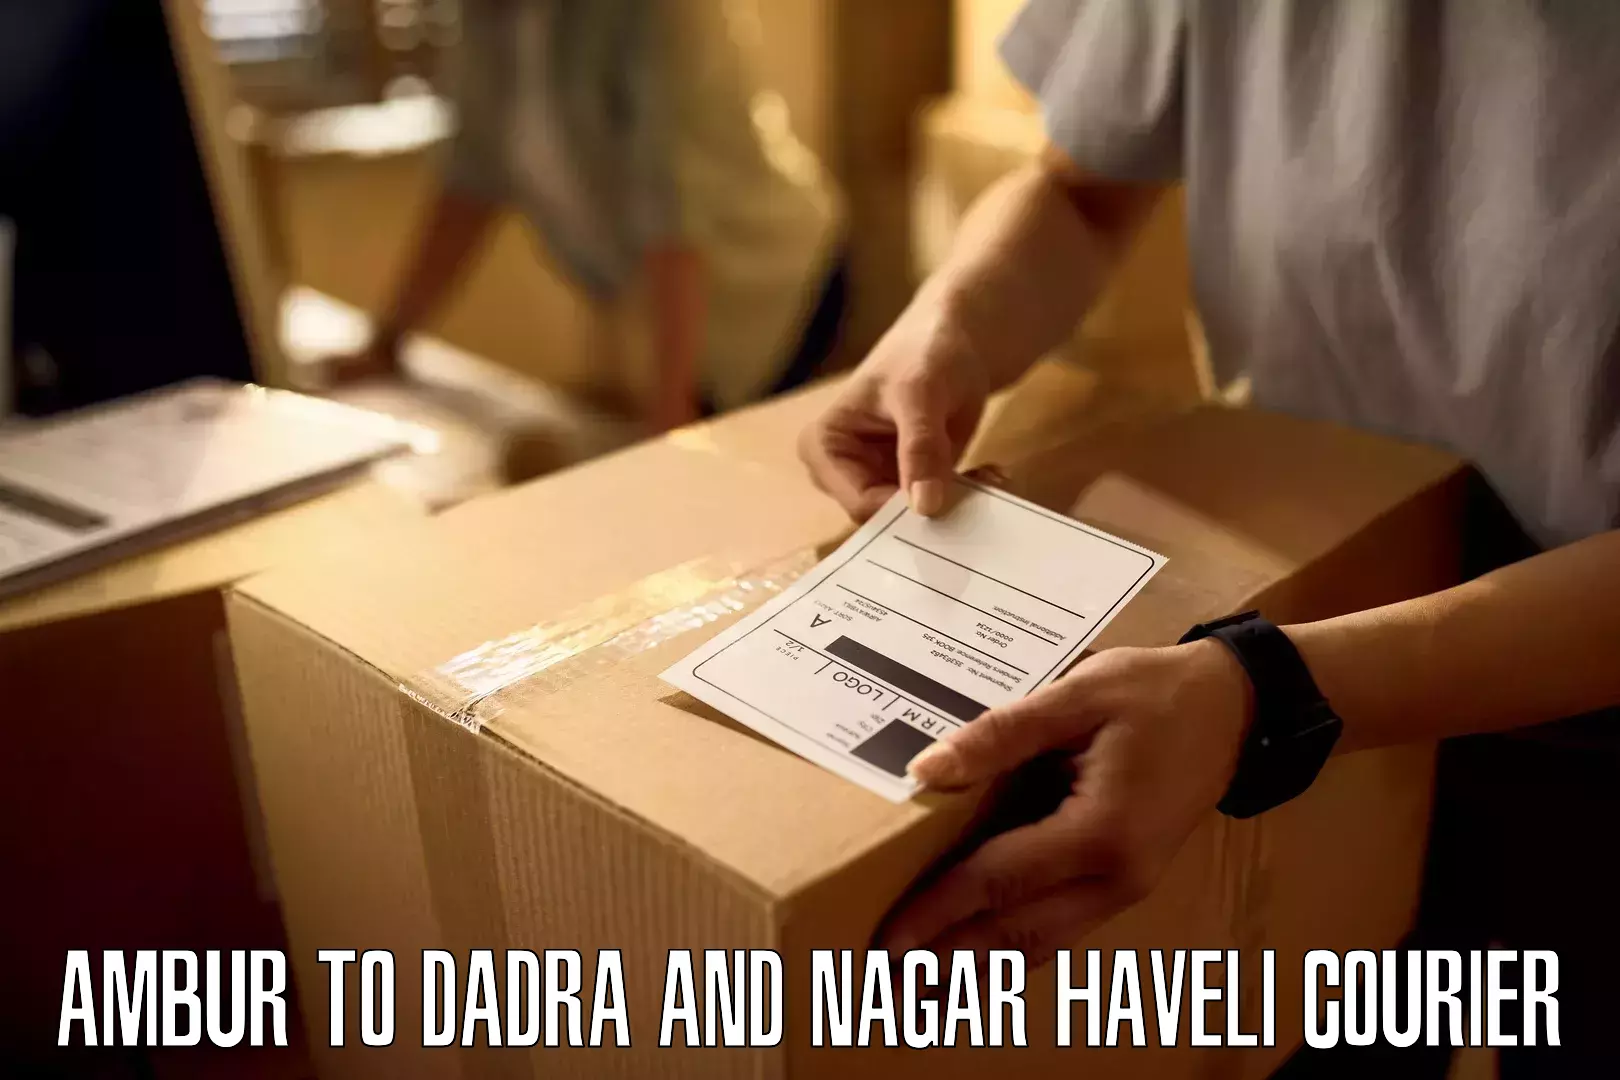 Full-service courier options in Ambur to Dadra and Nagar Haveli